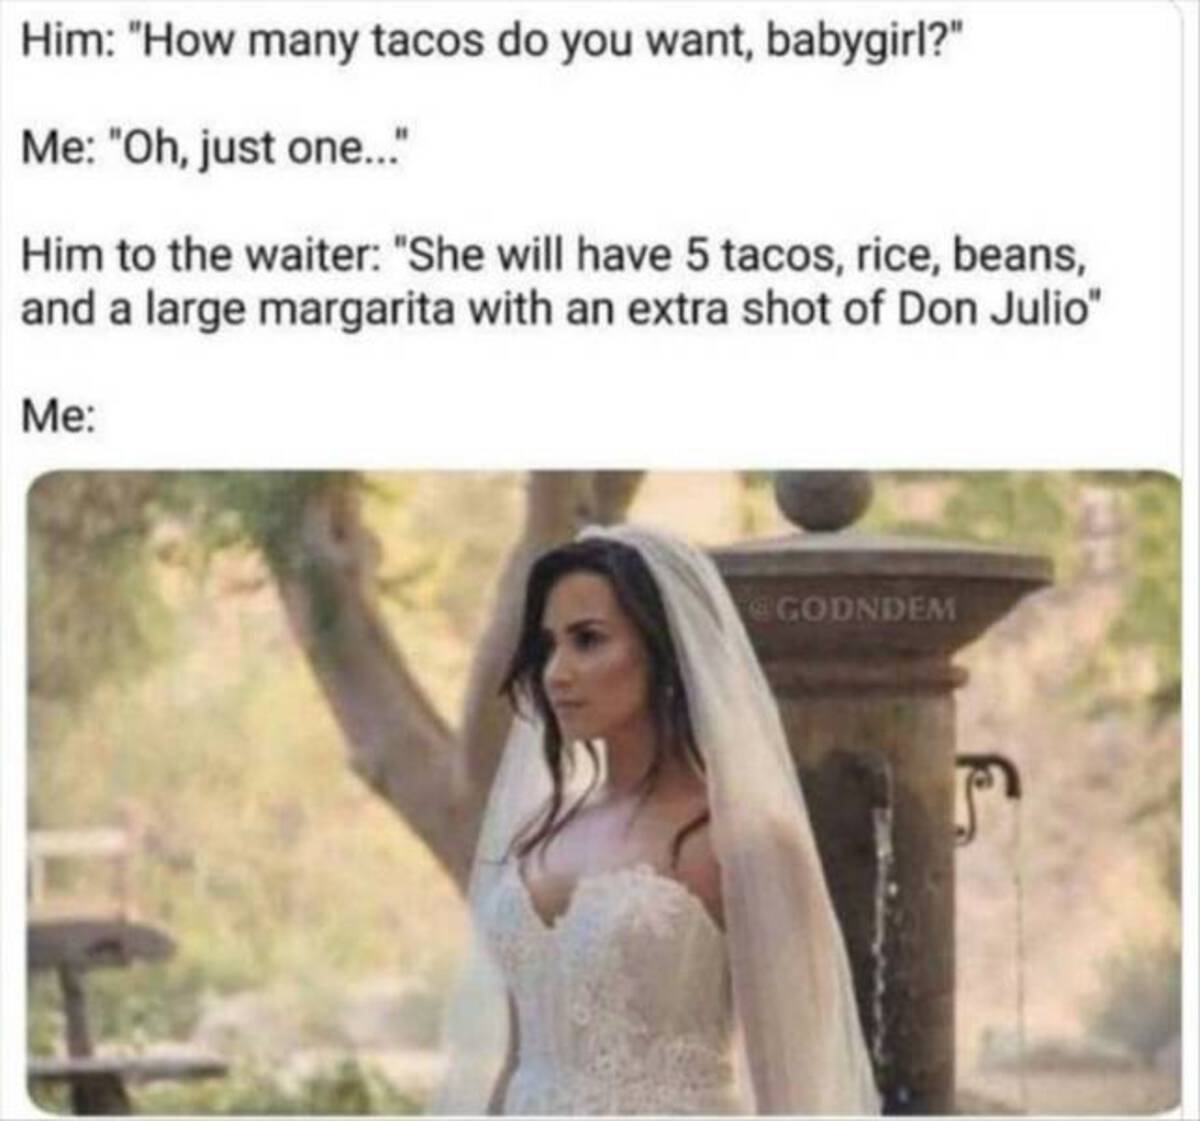 she will have a large meme - Him "How many tacos do you want, babygirl?" Me "Oh, just one..." Him to the waiter "She will have 5 tacos, rice, beans, and a large margarita with an extra shot of Don Julio" Me Godndem